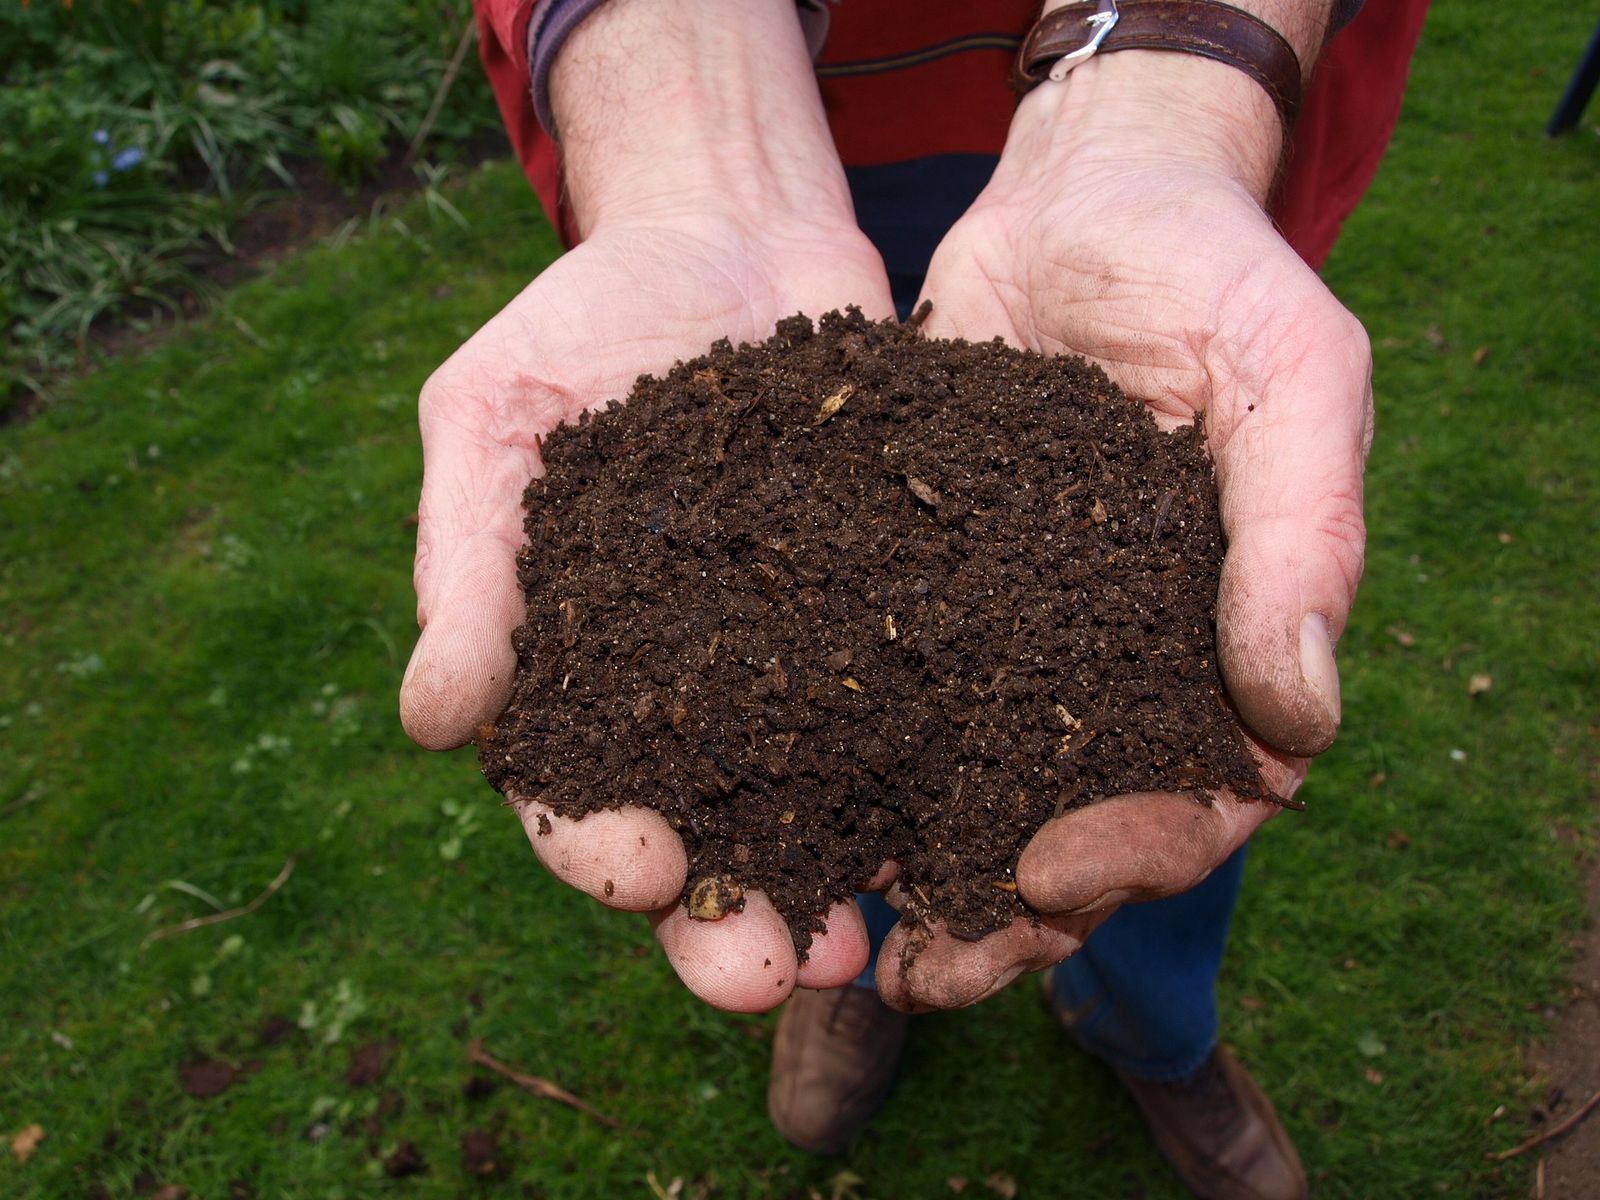 Composting Series Part 2: How to Compost